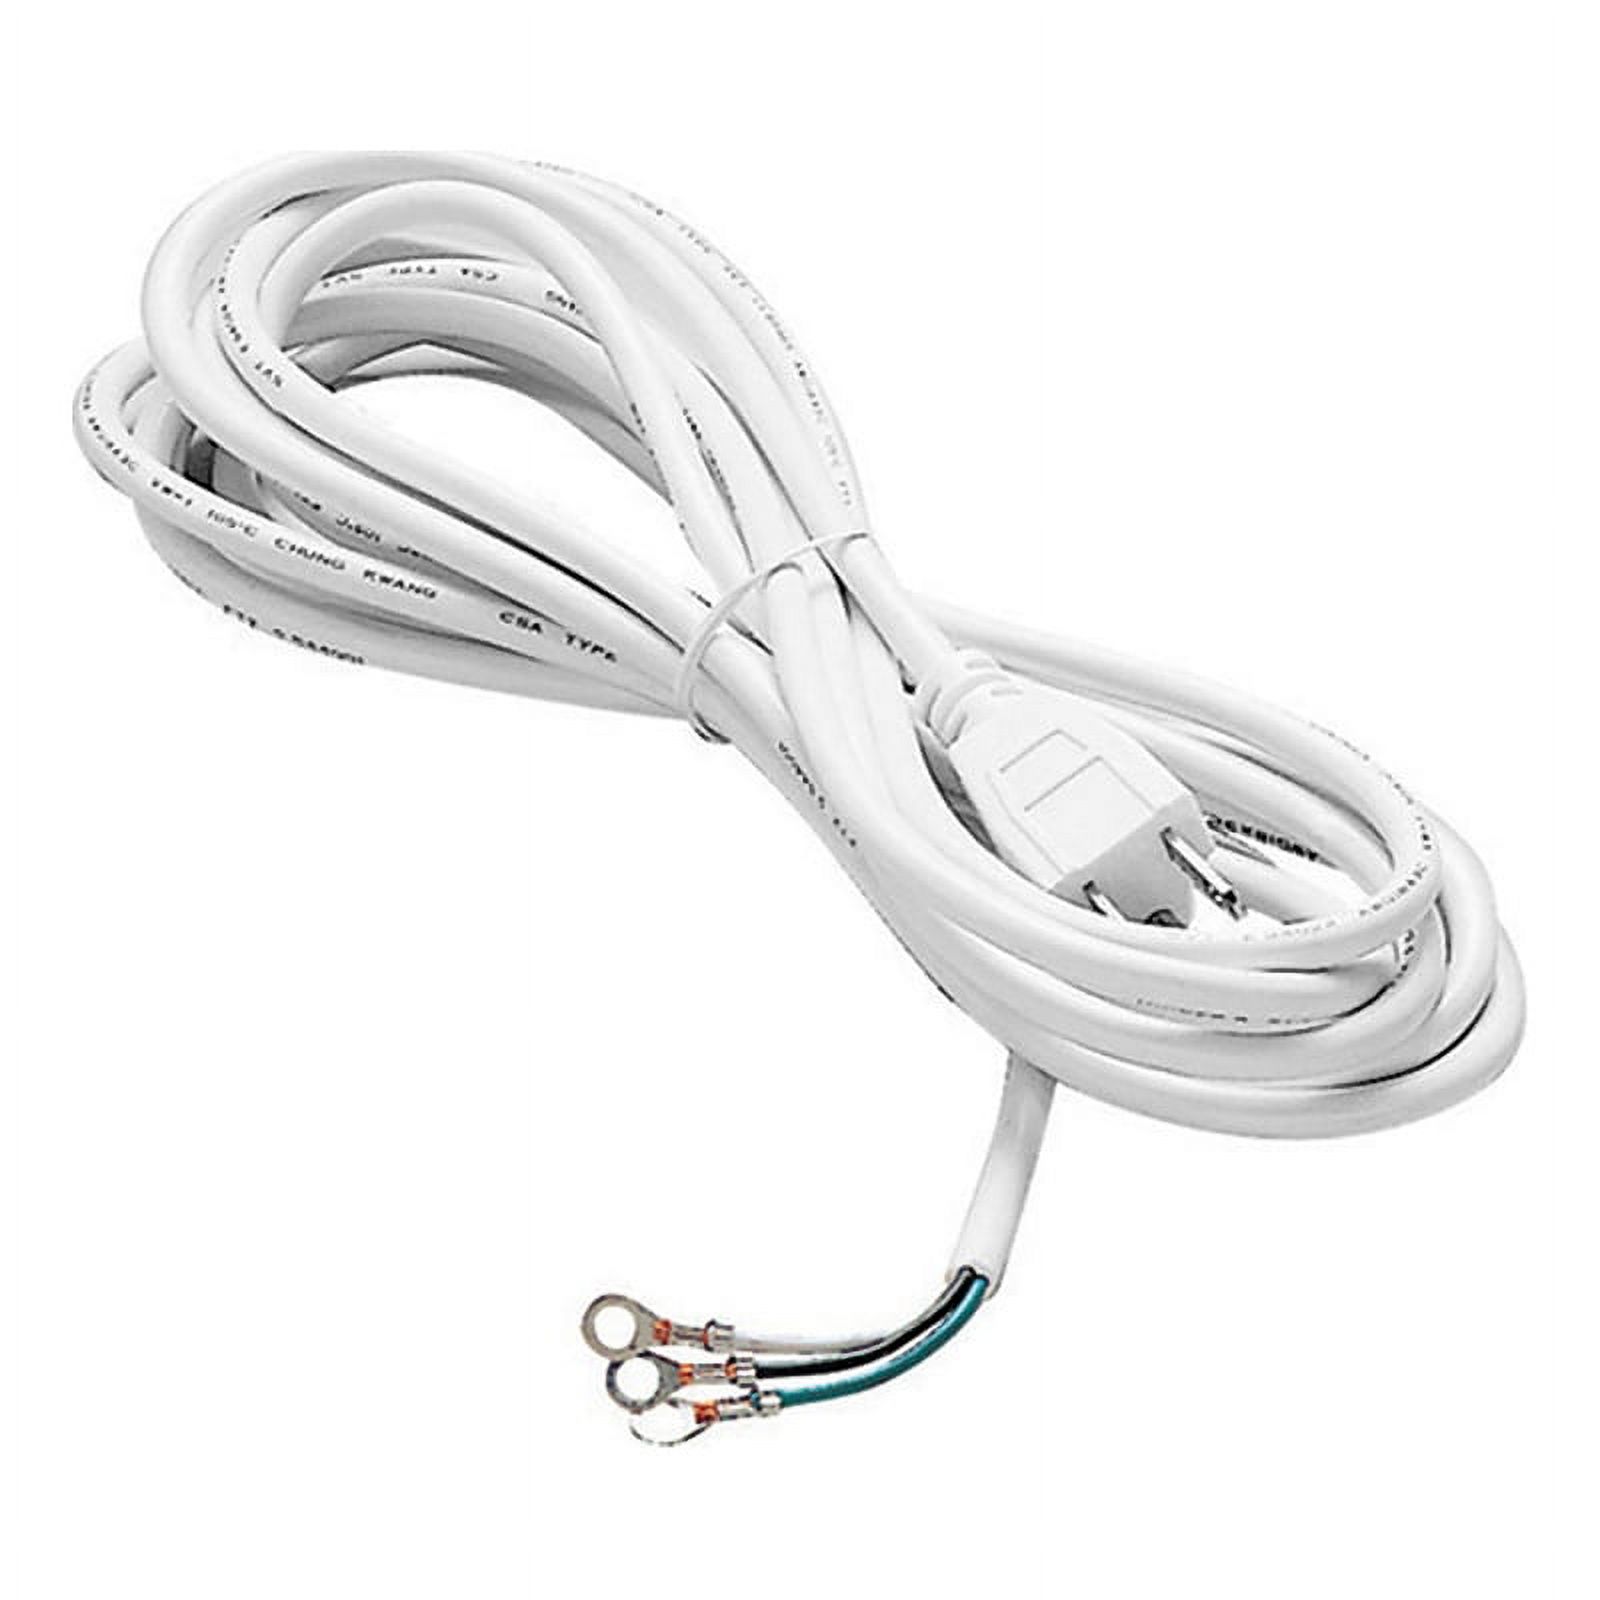 WAC Lighting H Track 3-Wire Plastic Power Cord with Ground in White - image 1 of 2